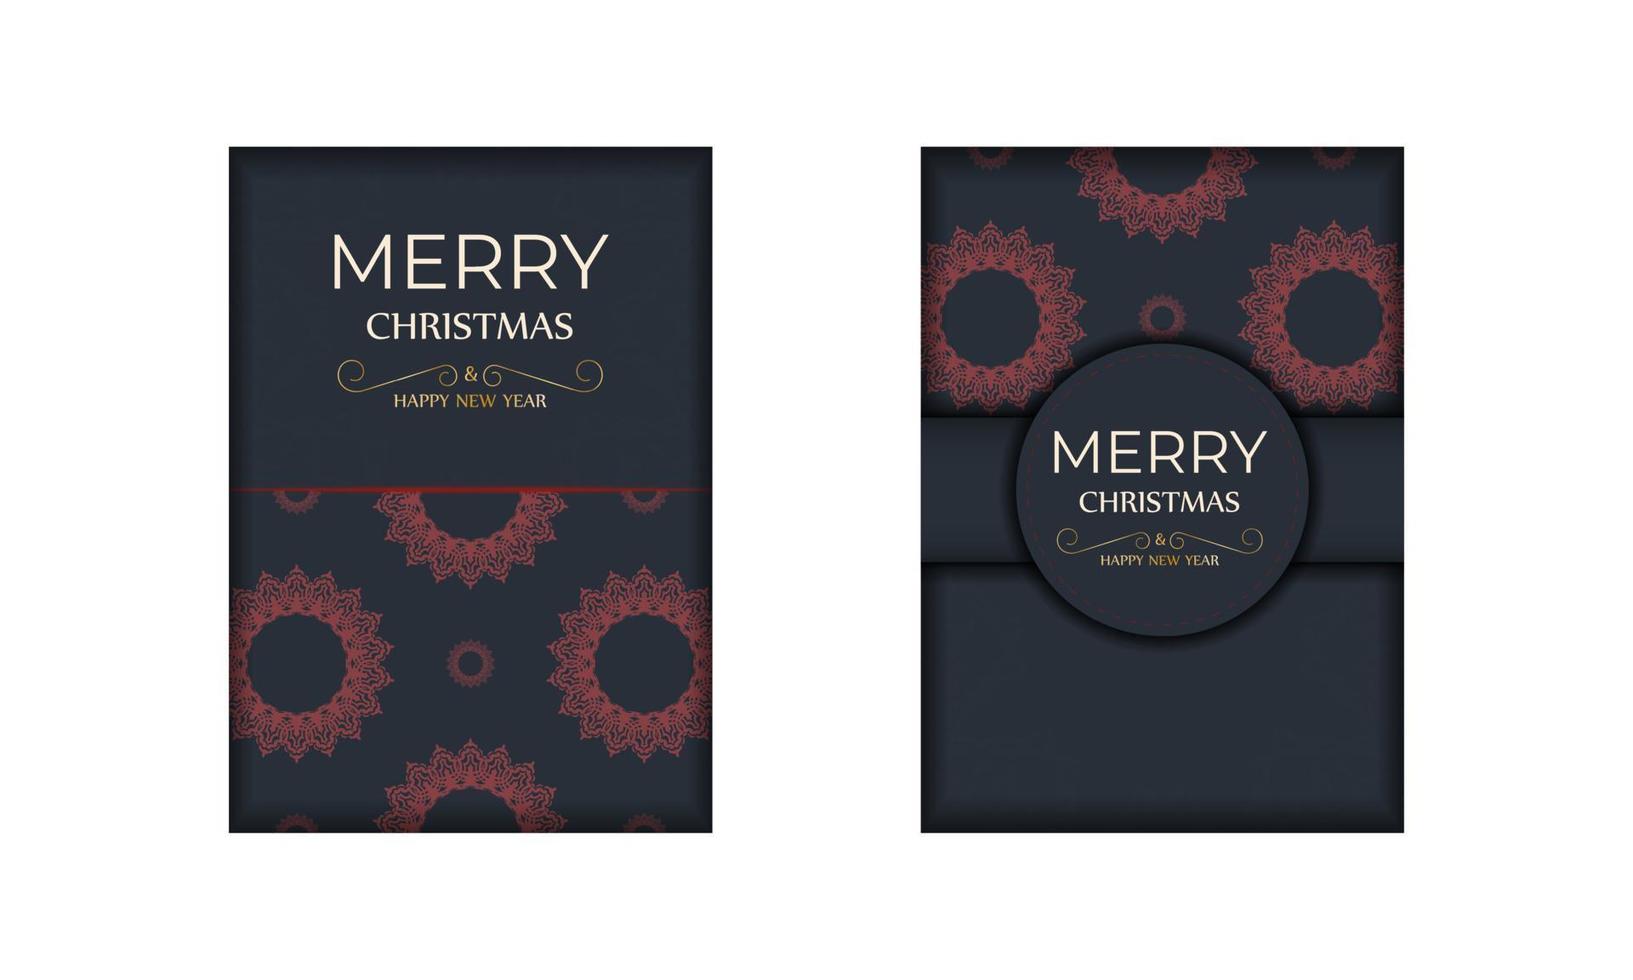 Merry Christmas vector greeting card design in gray color with red patterns. Design poster Happy new year and winter ornament.